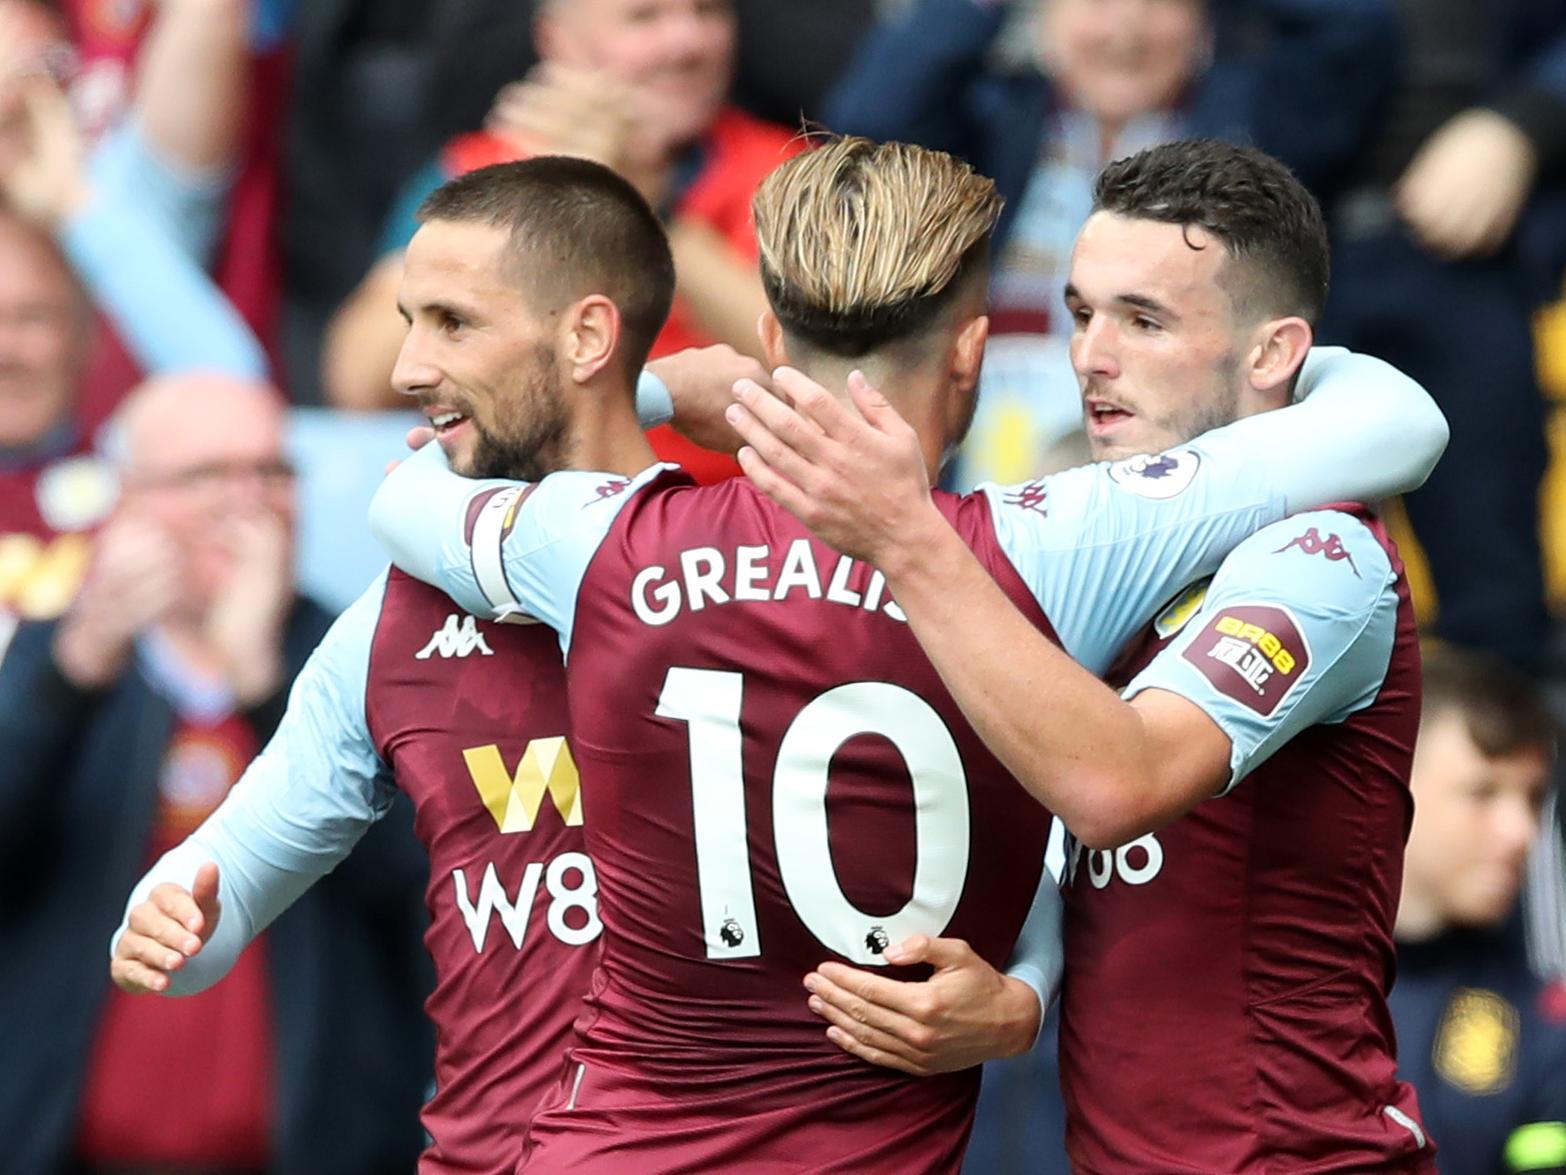 Midfield duo Jack Grealish and John McGinn have been on fire for the former top tier powerhouse, and they'll need them to fire on all cylinders to keep up with the pace.